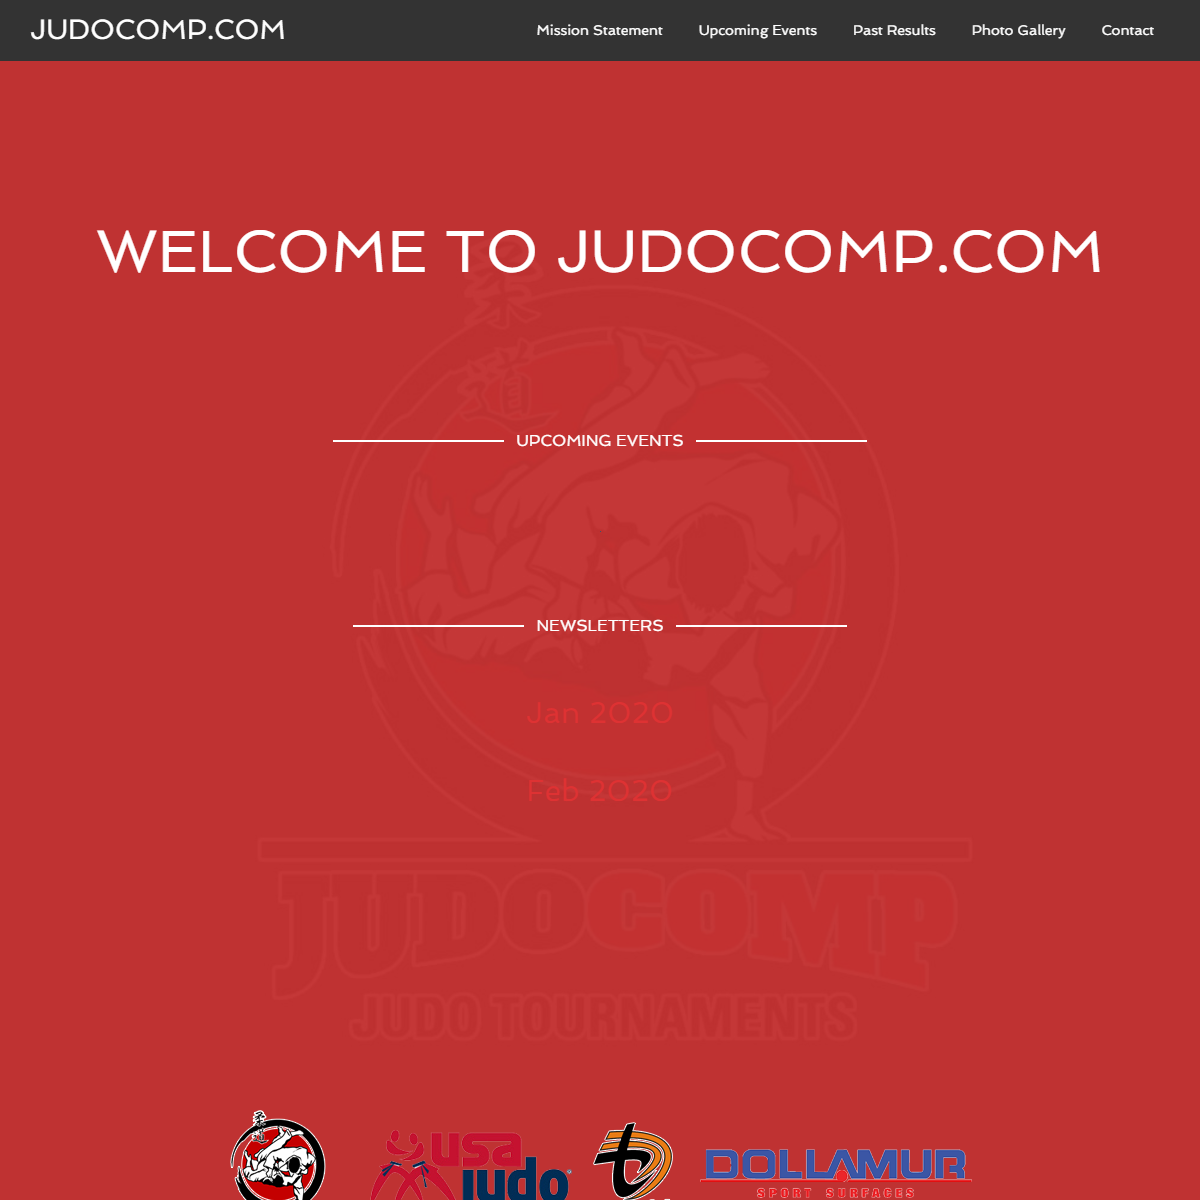 A complete backup of http://www.judocomp.com/